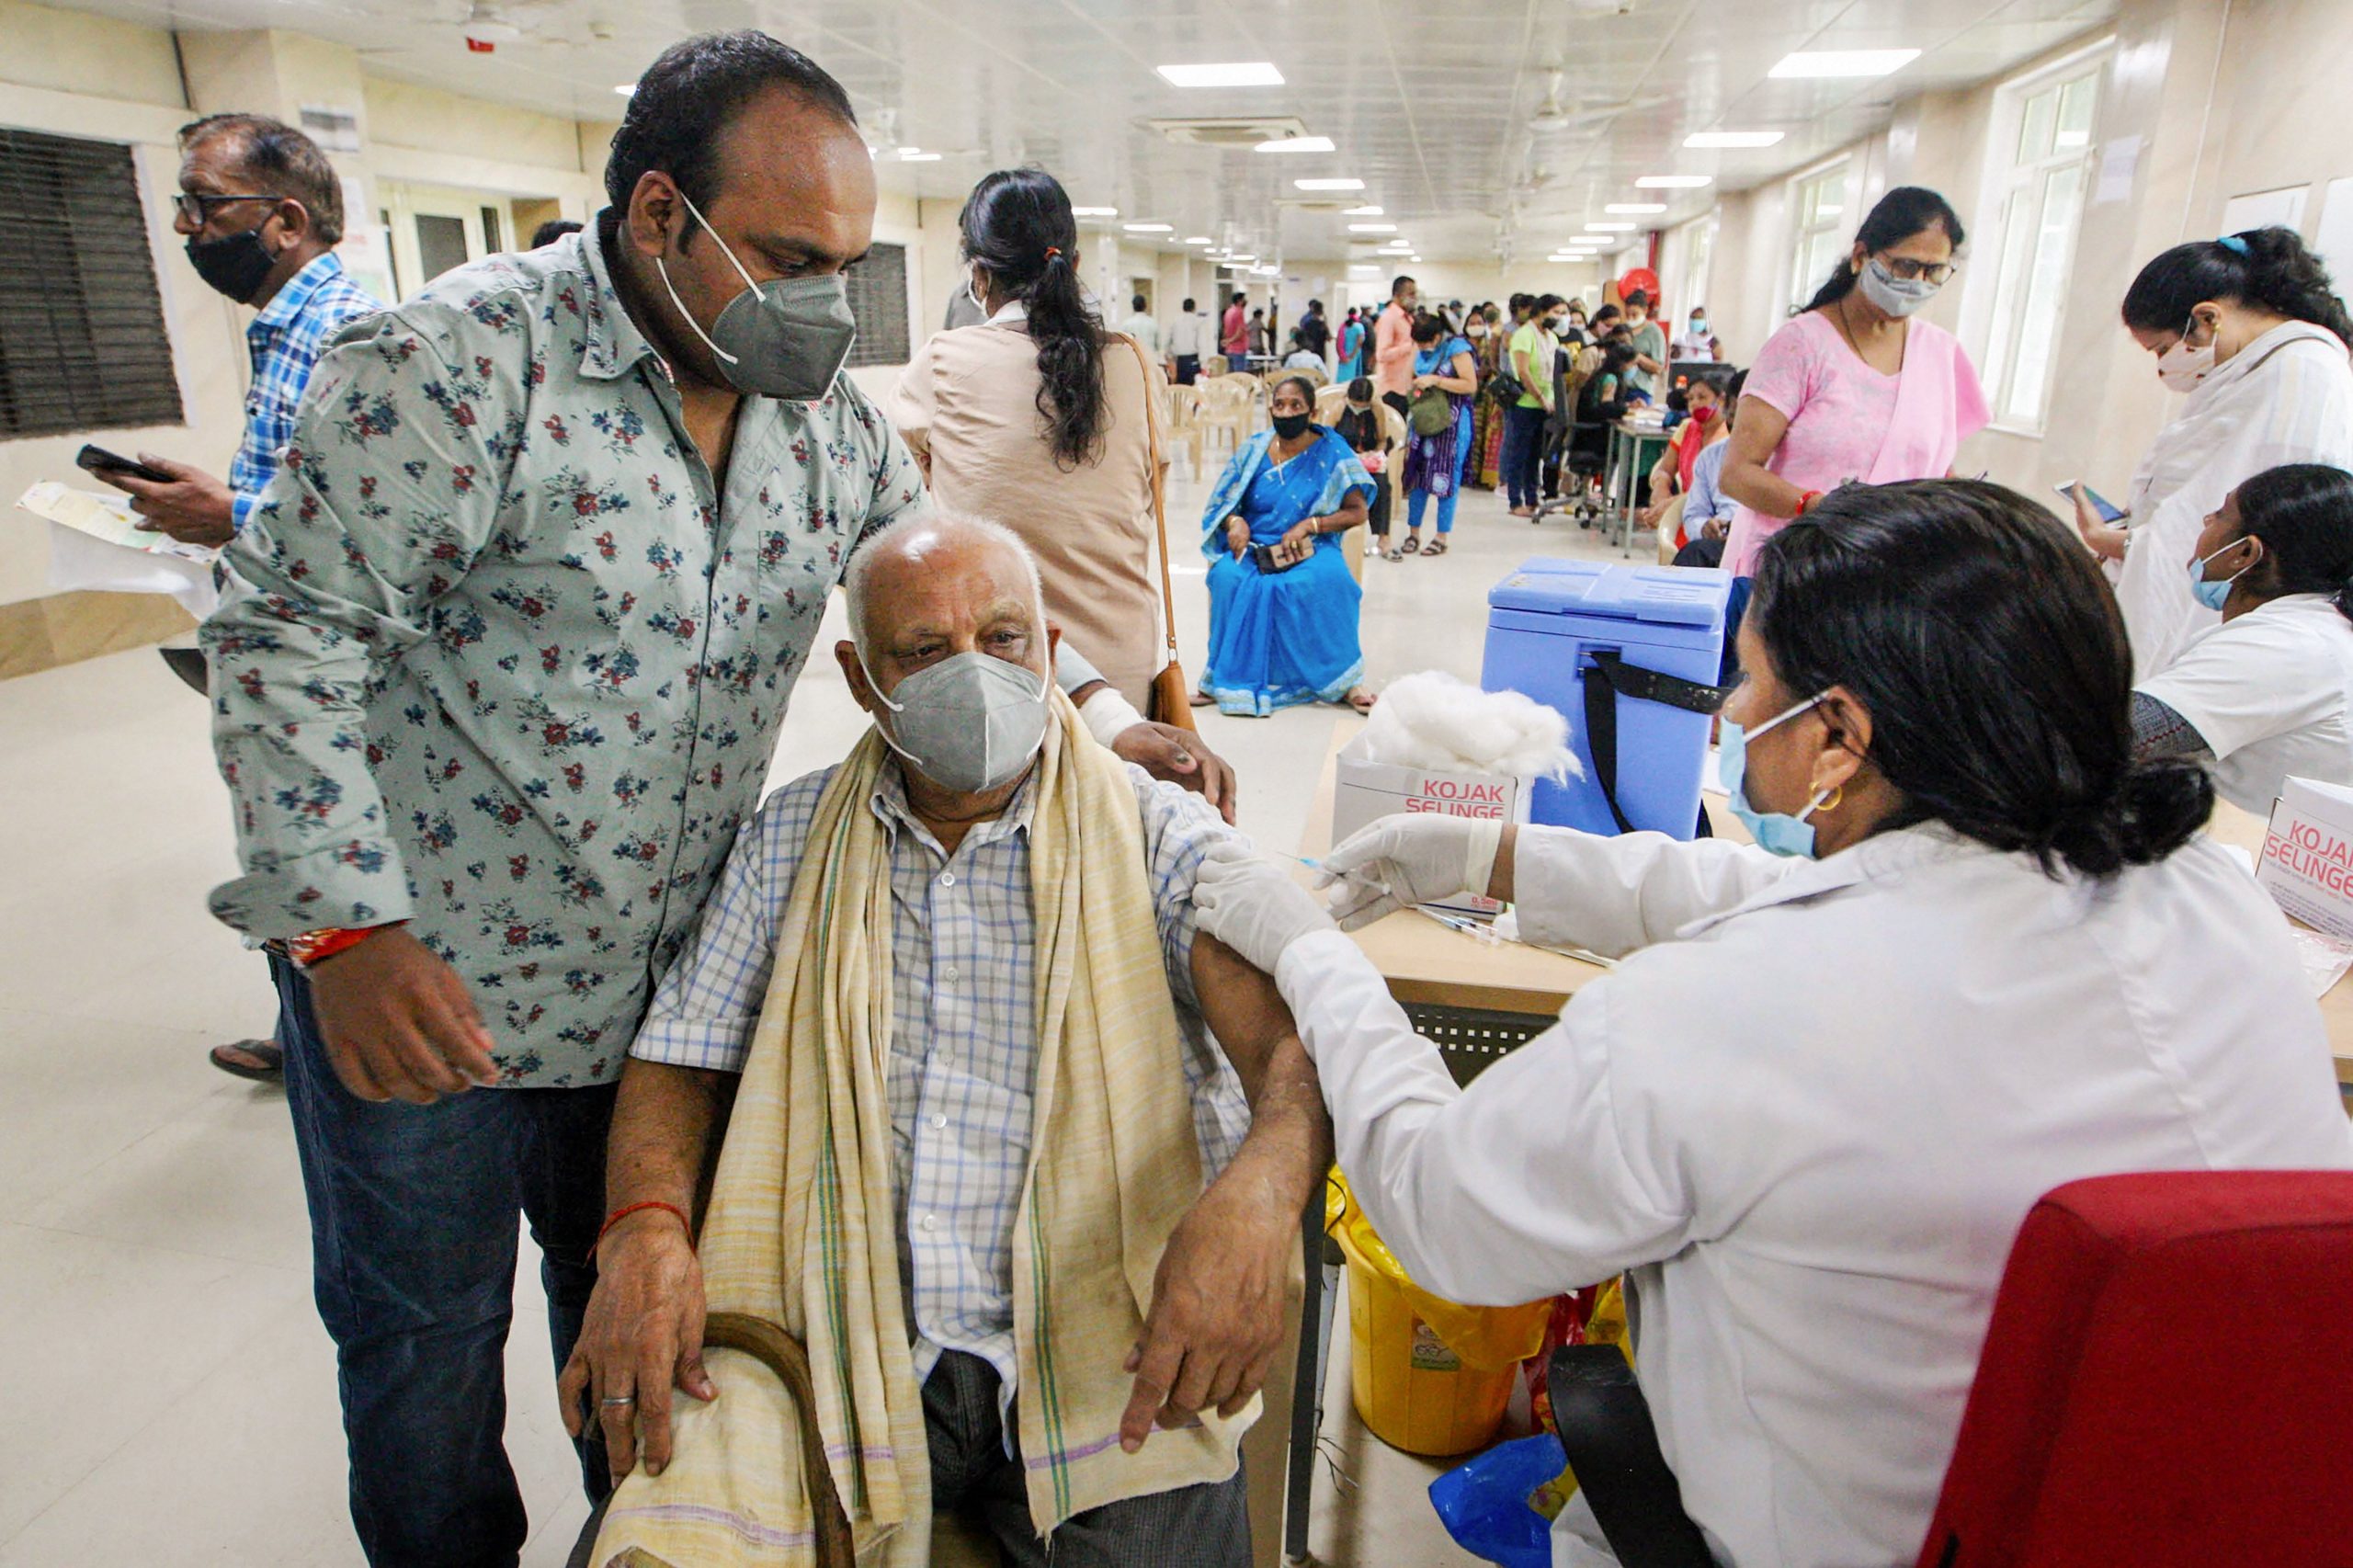 India records 46,164 new COVID-19 cases, 8,500 more than yesterday